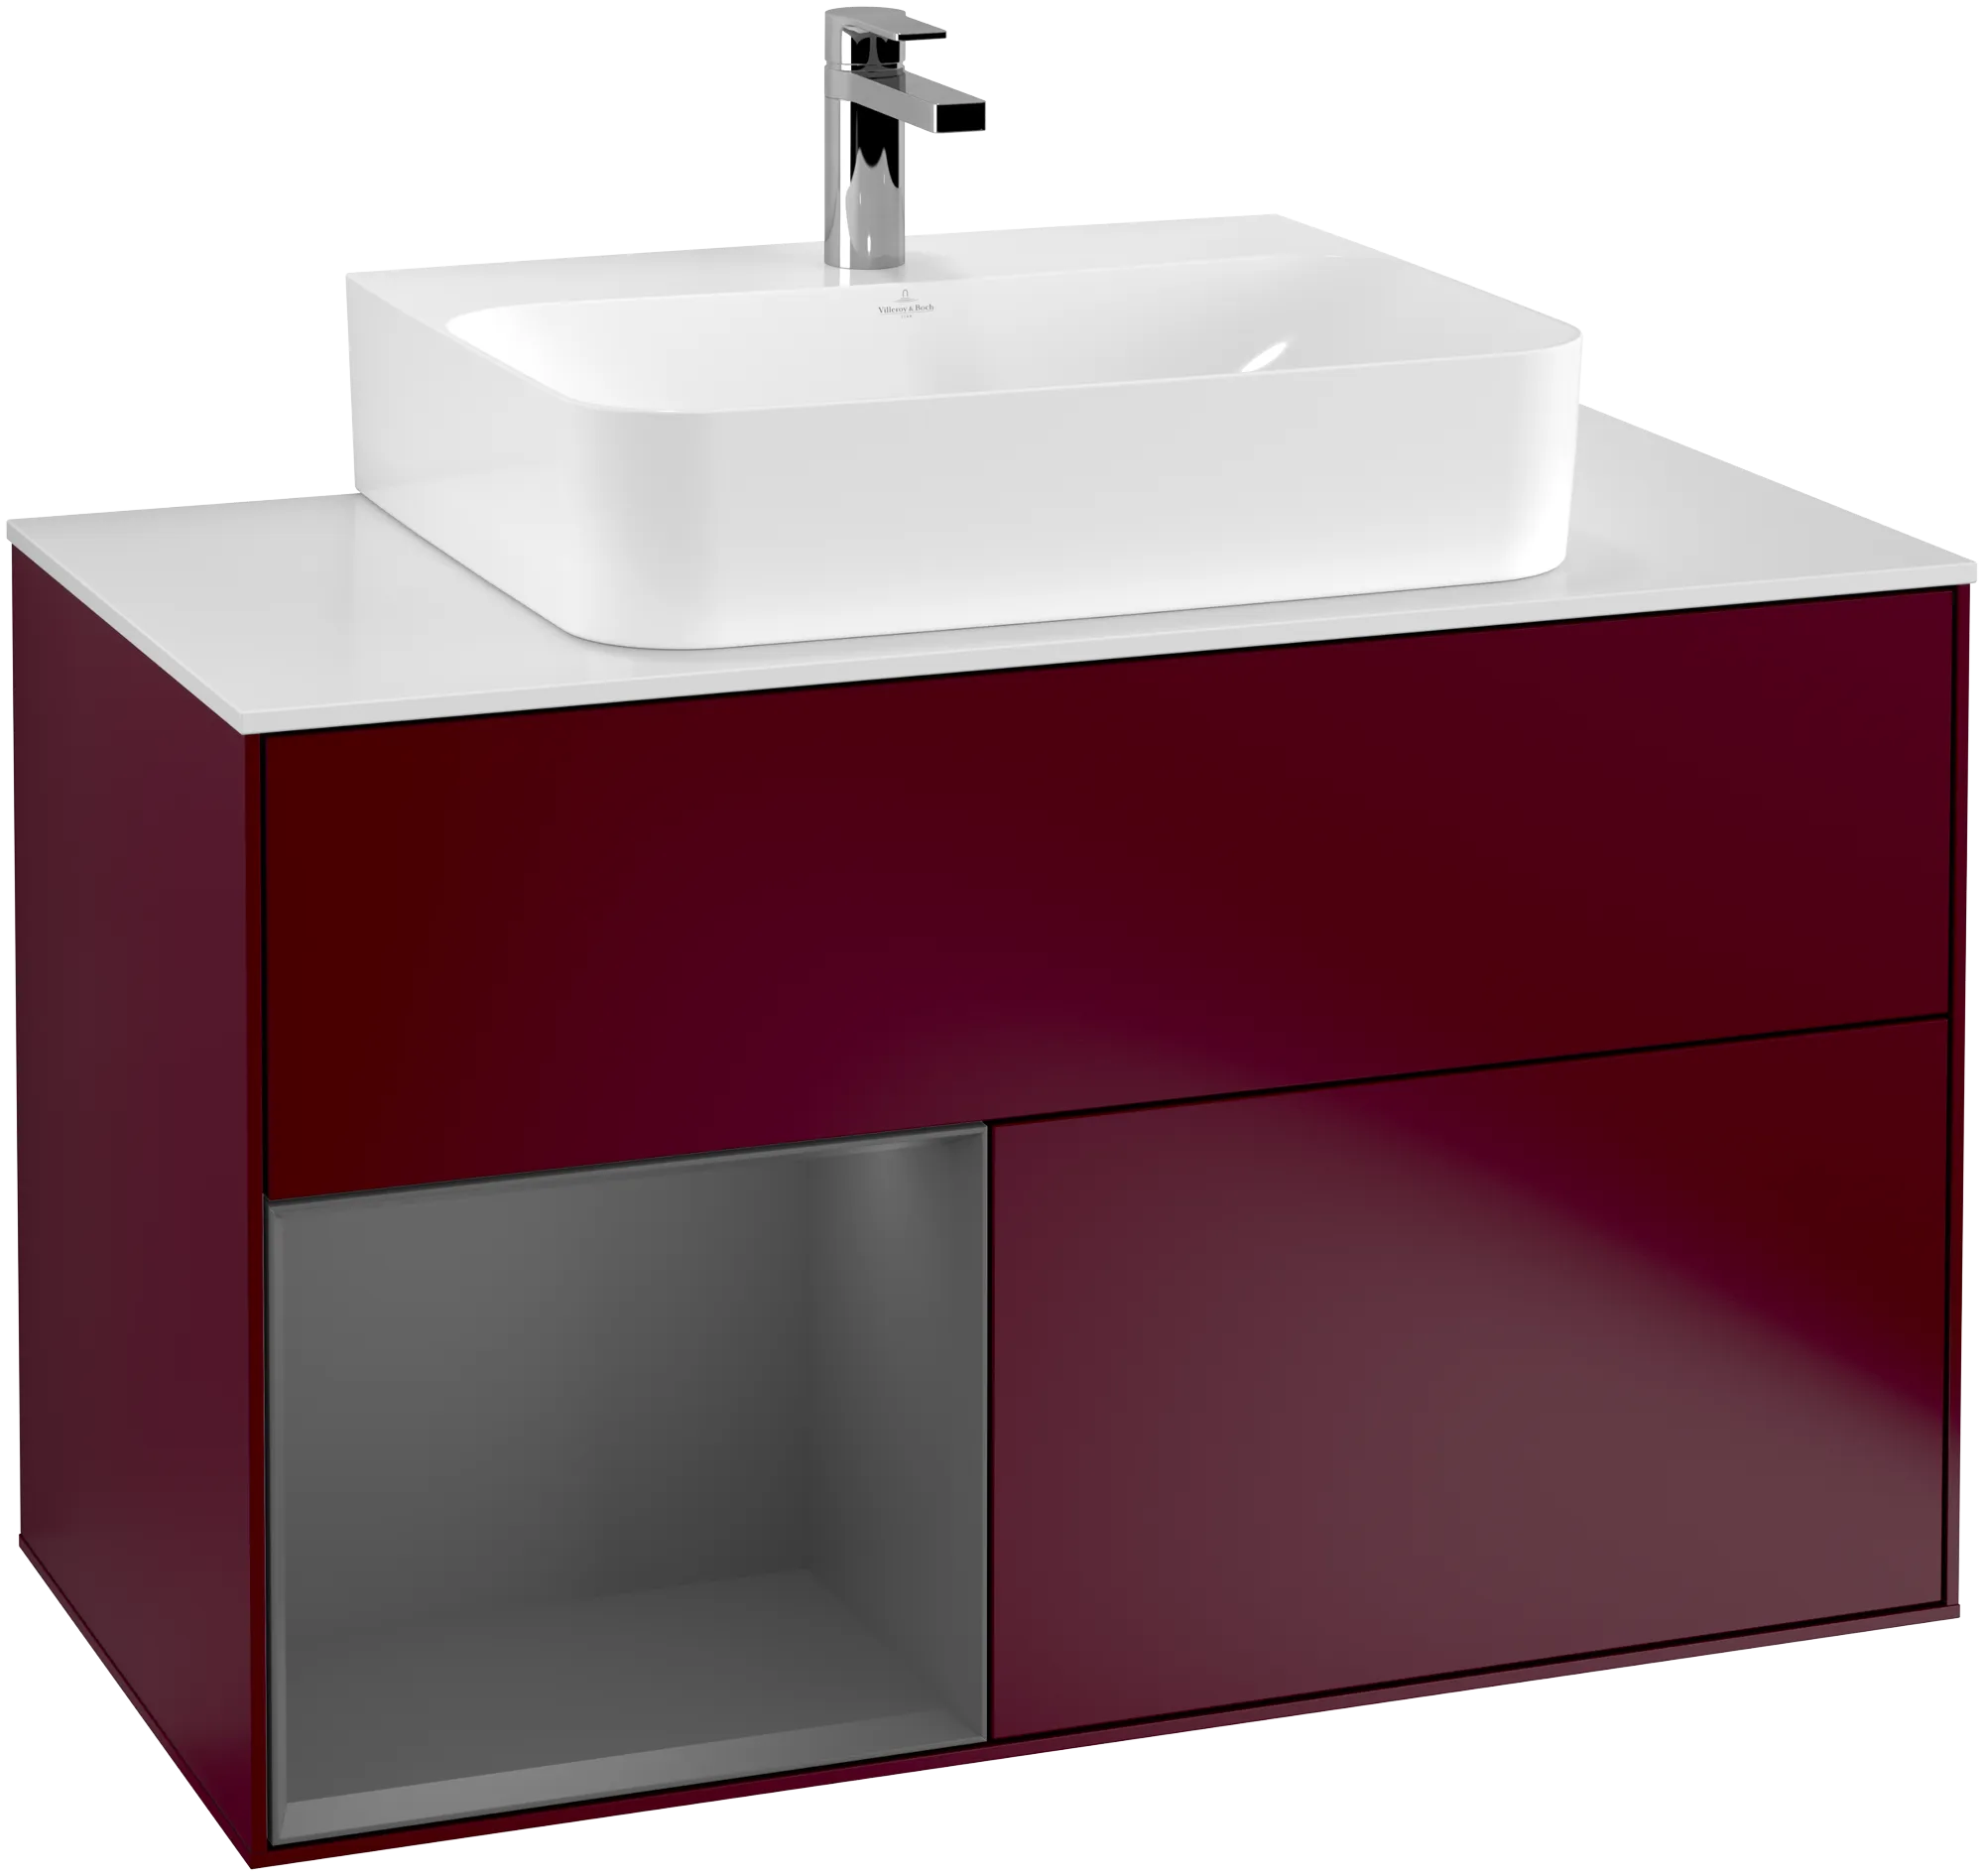 Picture of VILLEROY BOCH Finion Vanity unit, with lighting, 2 pull-out compartments, 1000 x 603 x 501 mm, Peony Matt Lacquer / Anthracite Matt Lacquer / Glass White Matt #G111GKHB